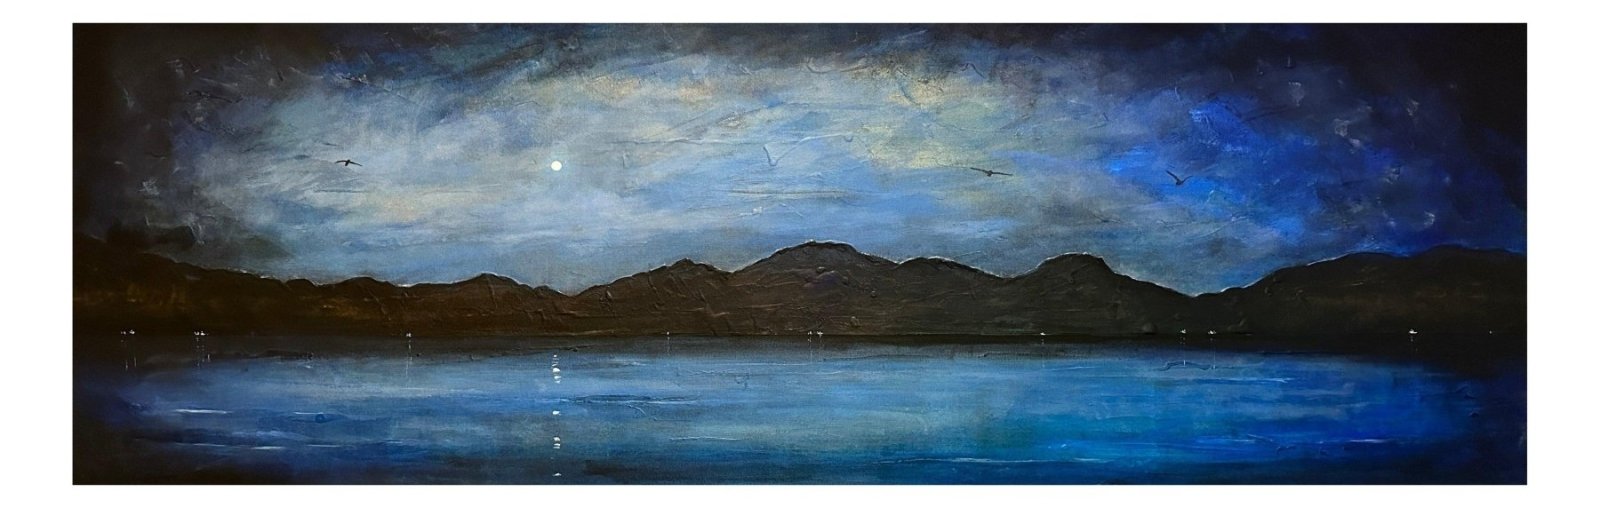 Clyde Night Closure-Panoramic Prints-River Clyde Art Gallery-Paintings, Prints, Homeware, Art Gifts From Scotland By Scottish Artist Kevin Hunter